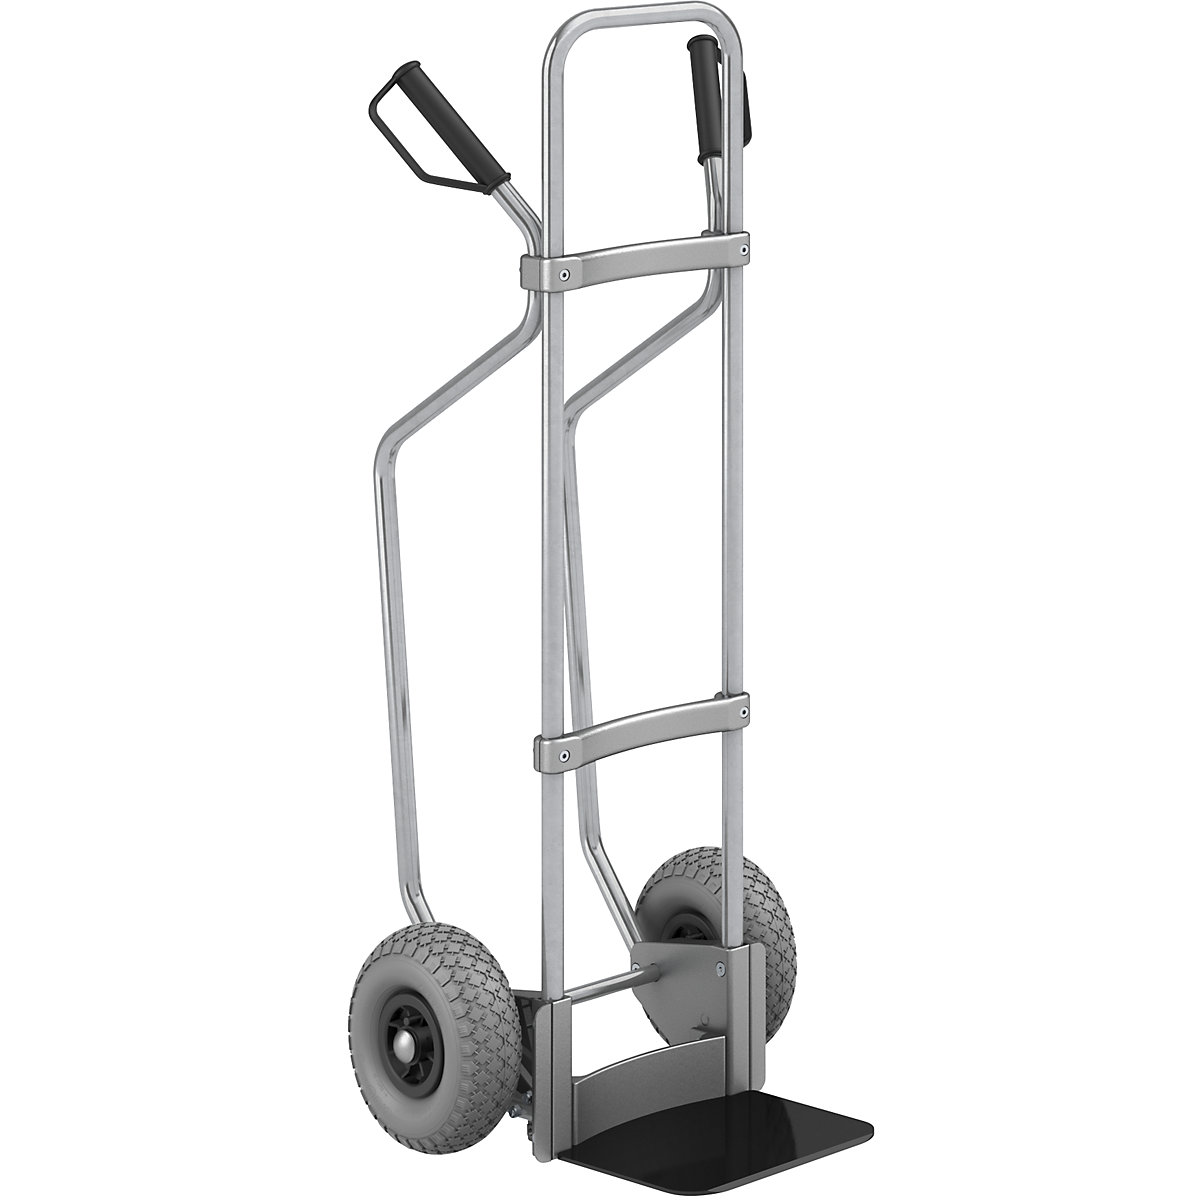 Sack truck with runners, zinc plated – eurokraft pro, footplate WxD 280 x 250 mm, black, PU tyres-2